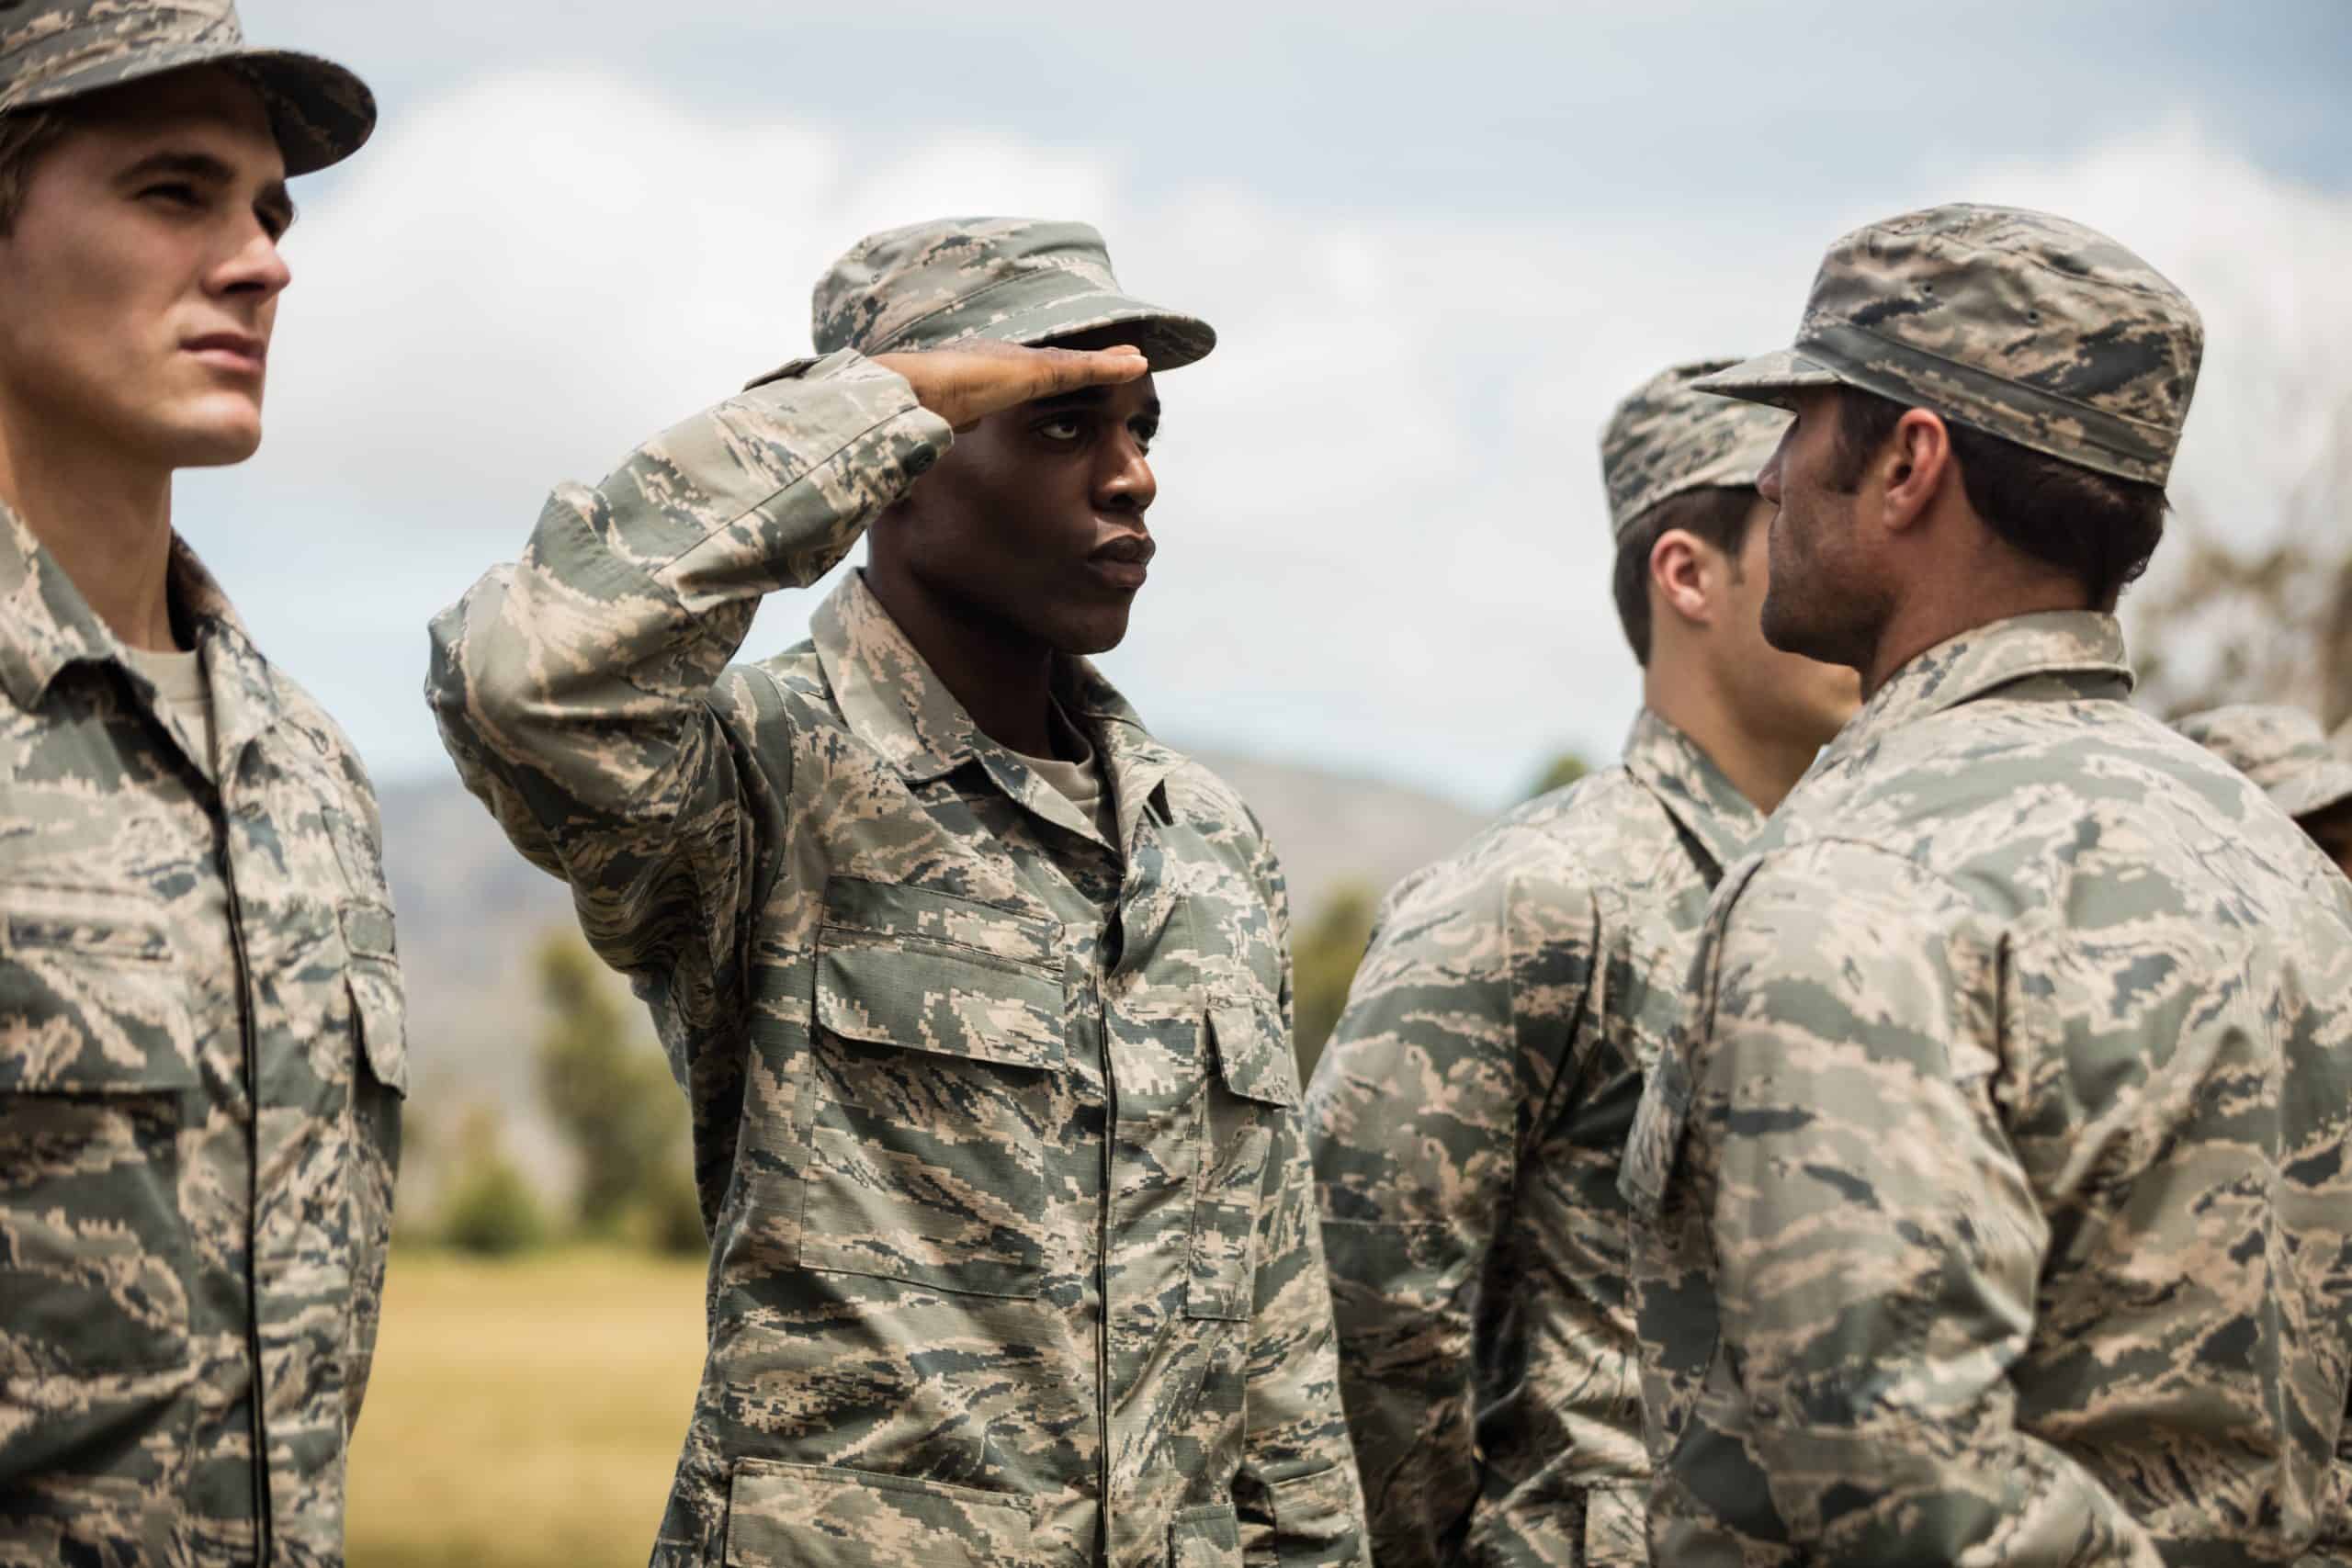 Military trainer giving training to a saluting military soldier in military uniform representing how PCA serves clients within the United States Military & Department of Defense (DoD)